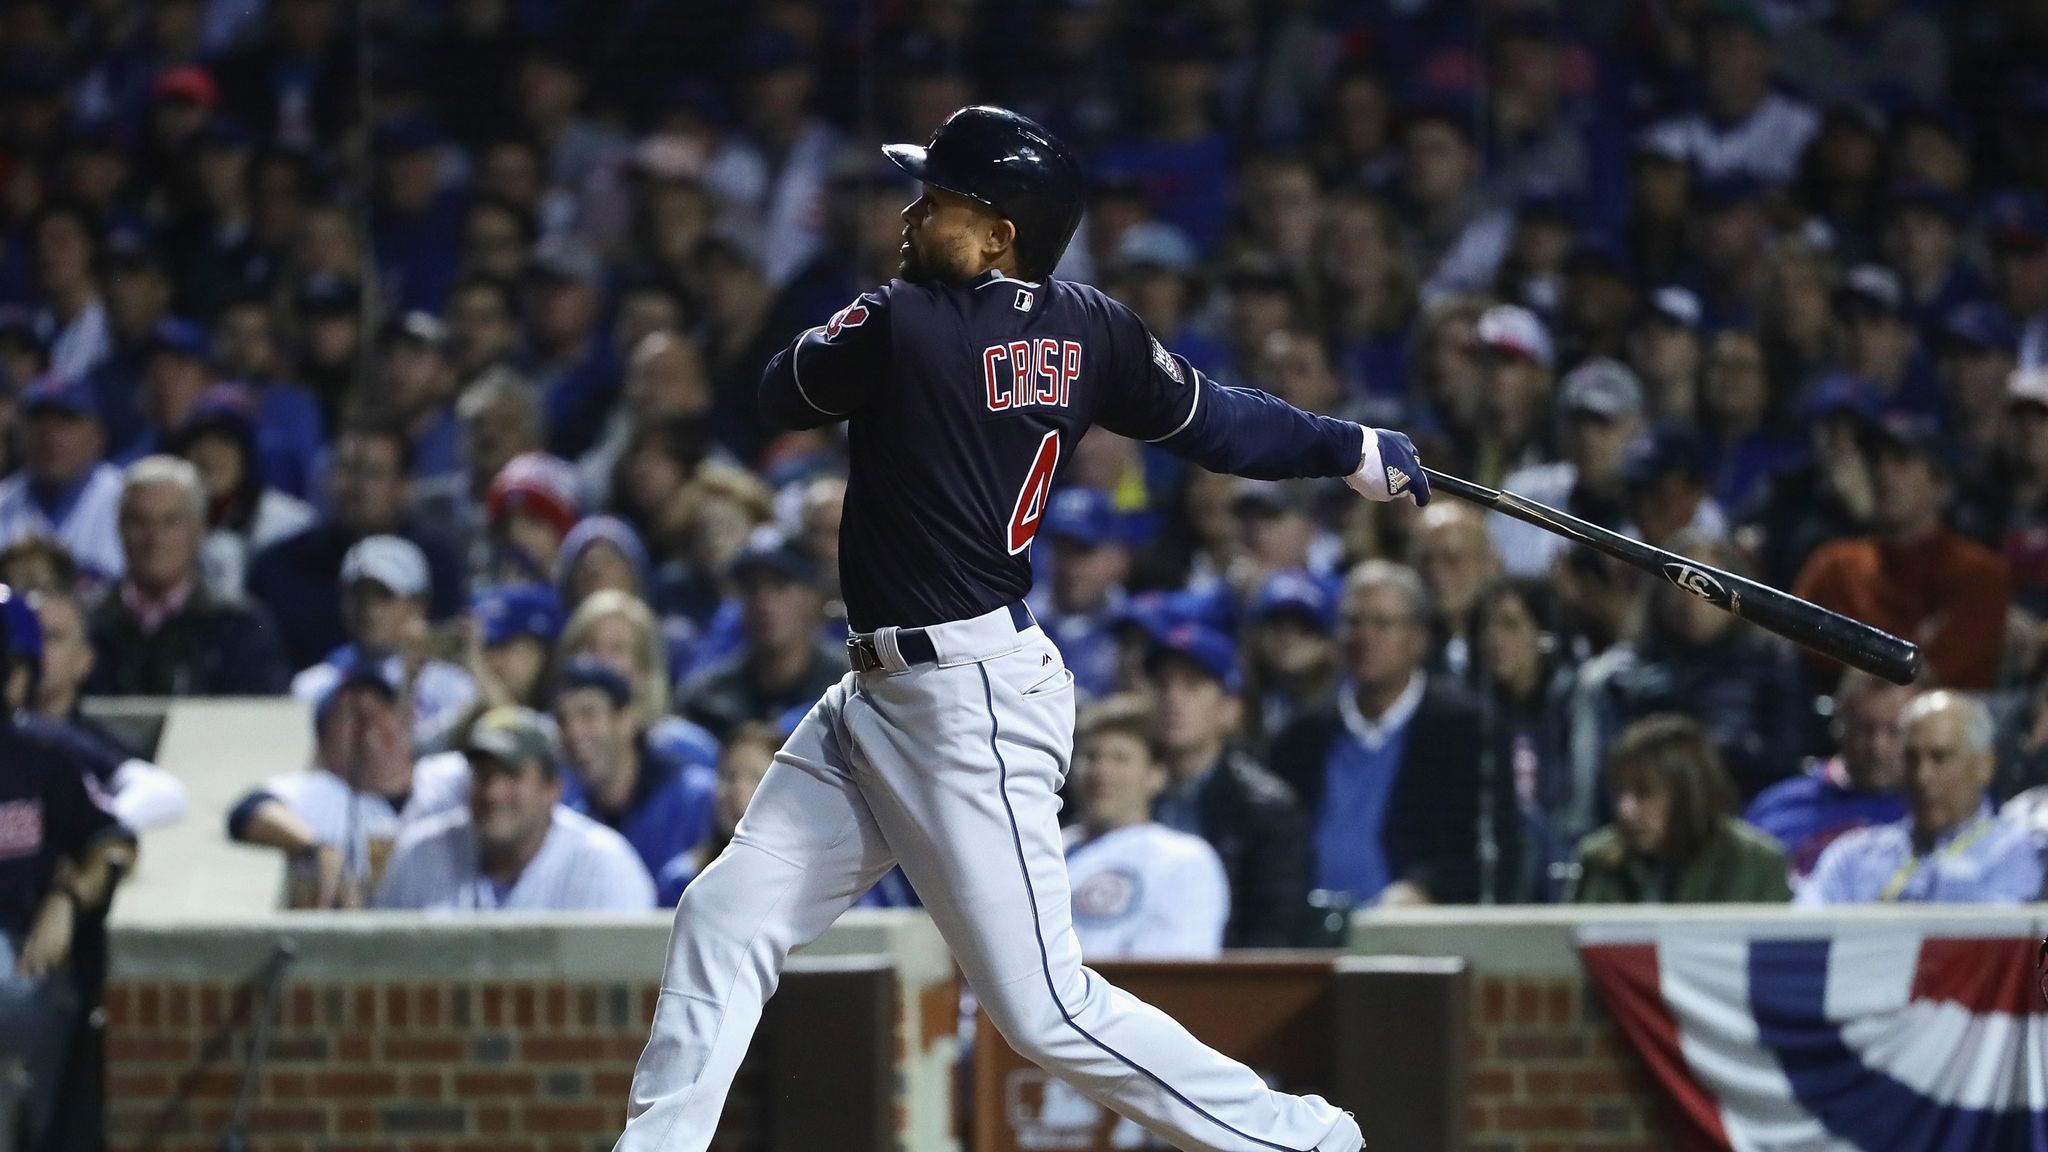 Coco Crisp earns Indians narrow win and 2-1 World Series lead over